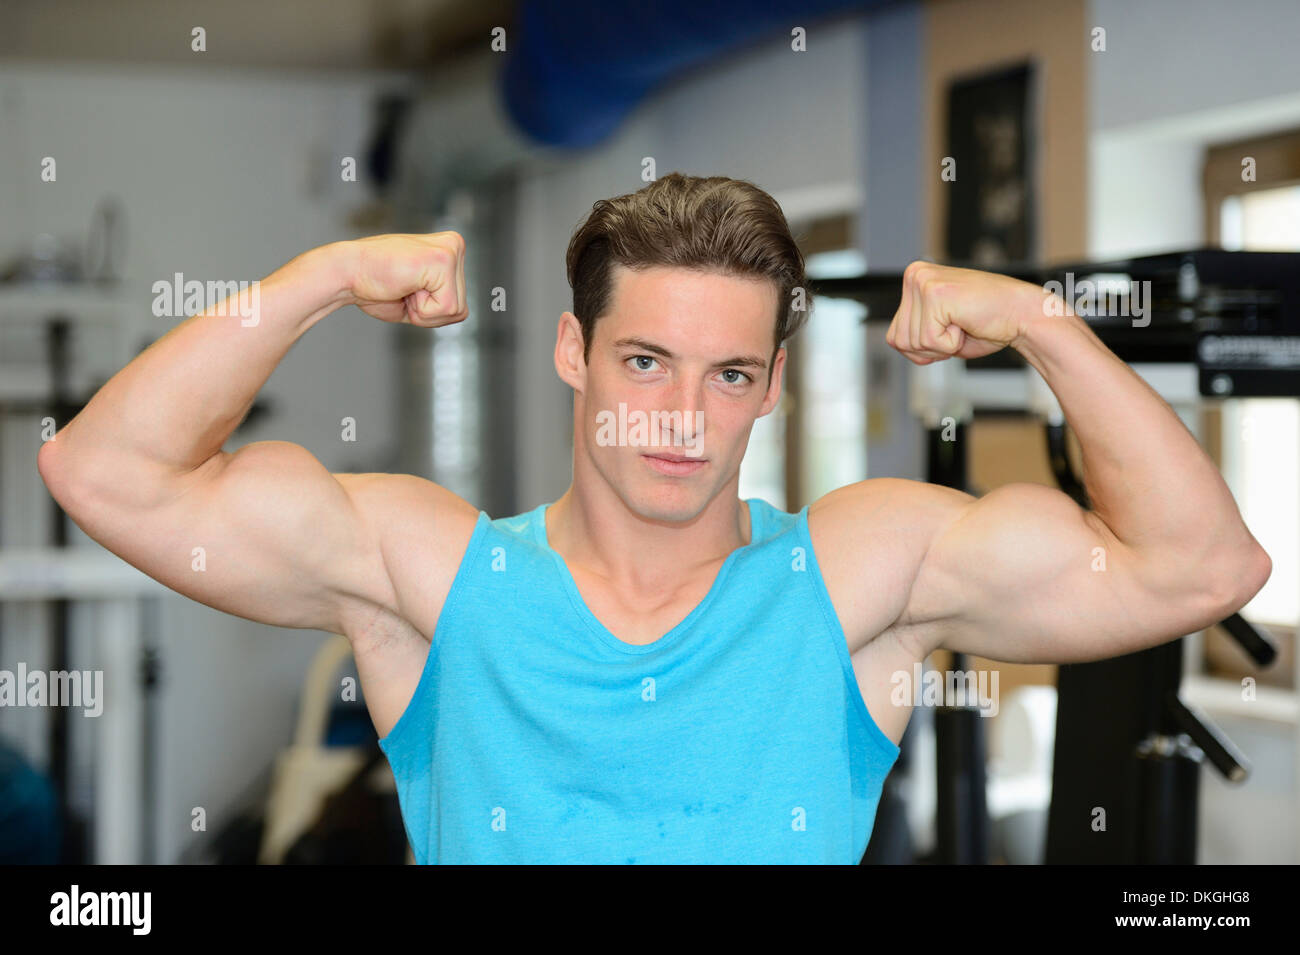 Young man posing in fitness center Stock Photo